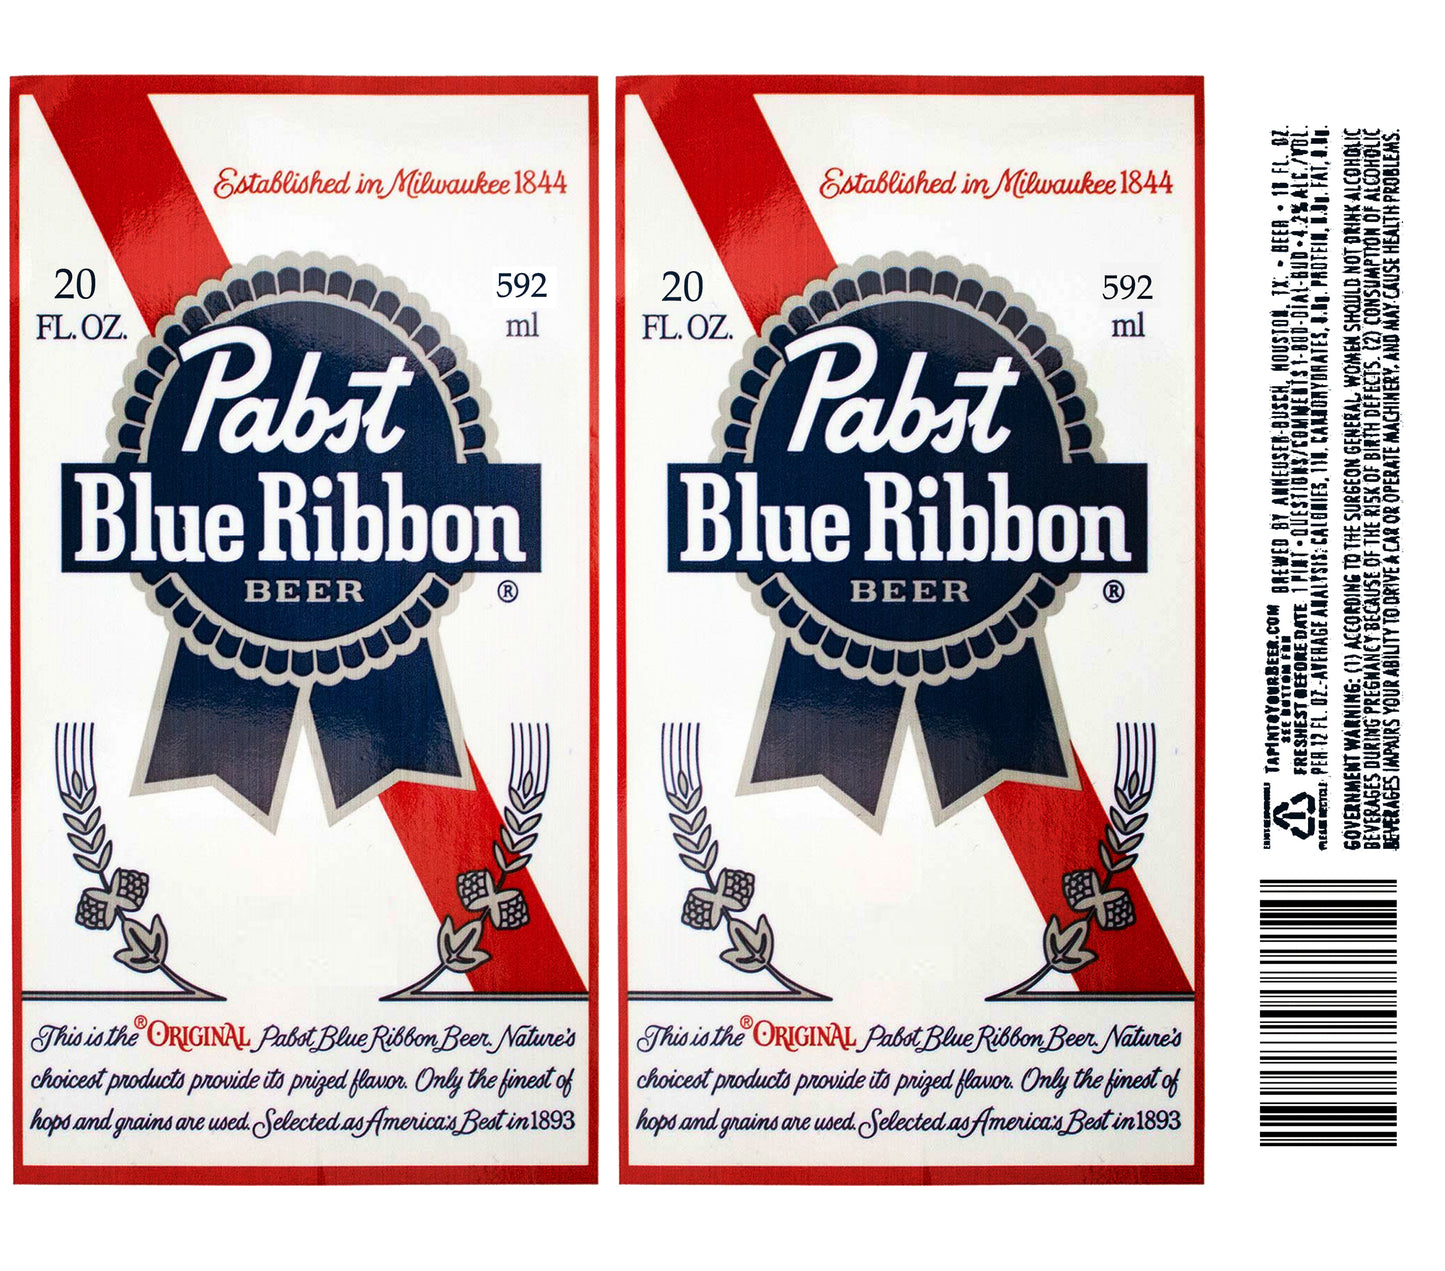 PBR CAN